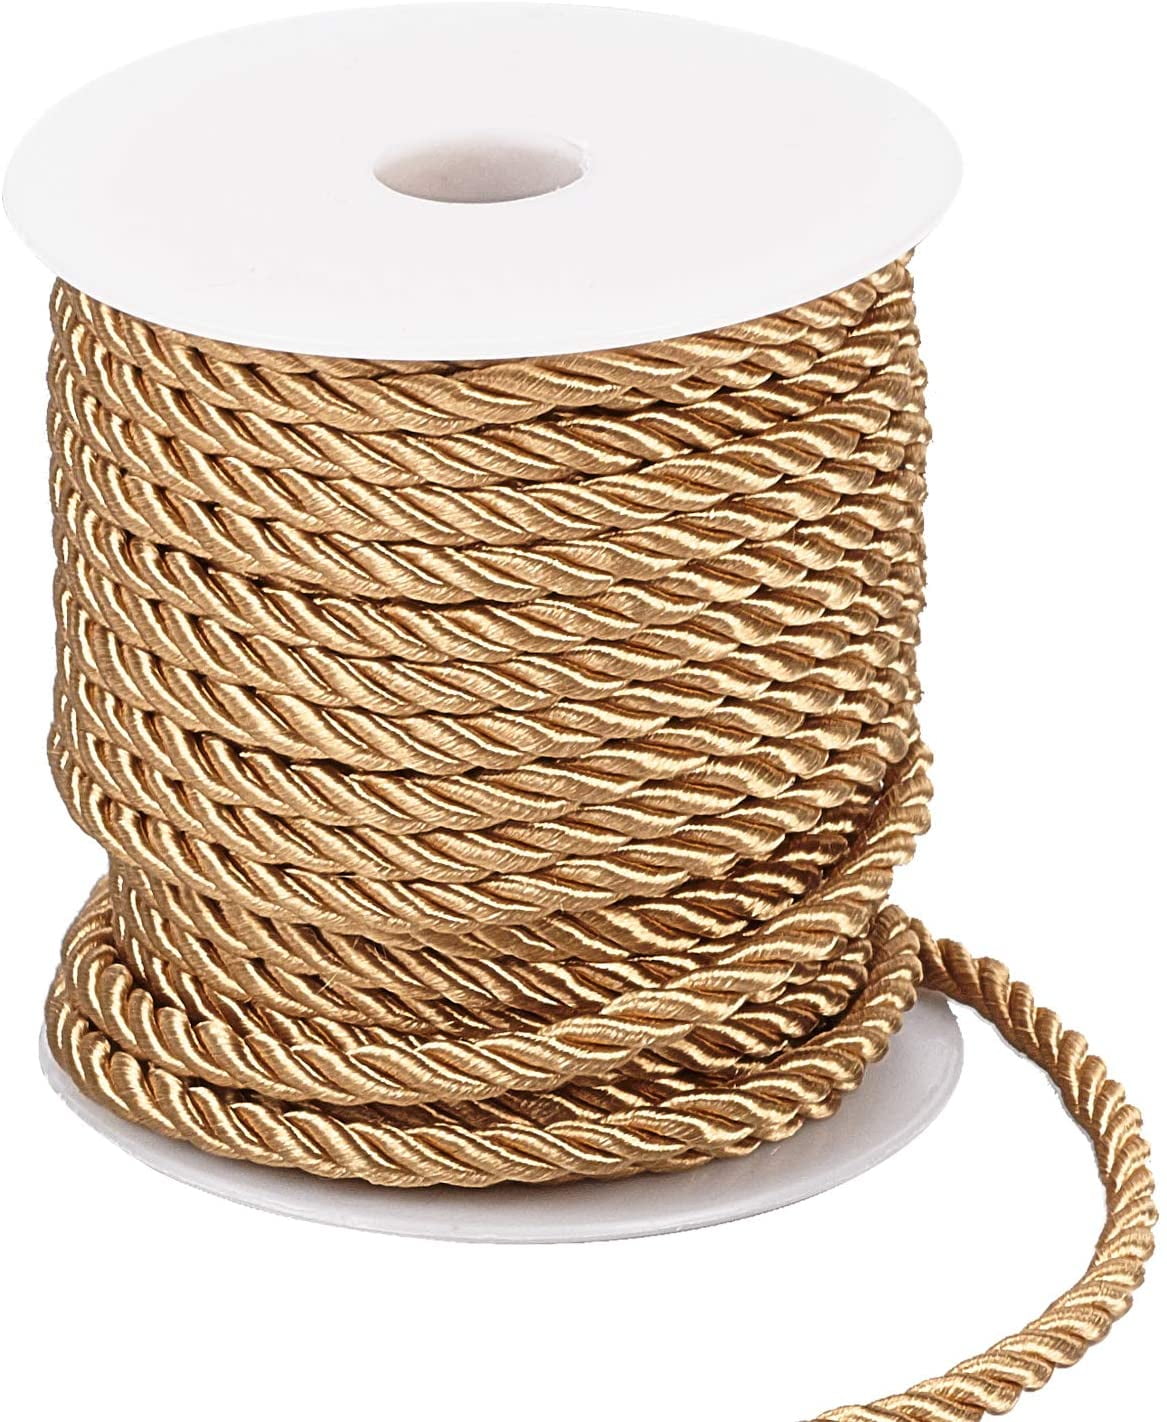 Tenn Well 5mm Twisted Cord Trim, 59 Feet Gold Decorative Rope for